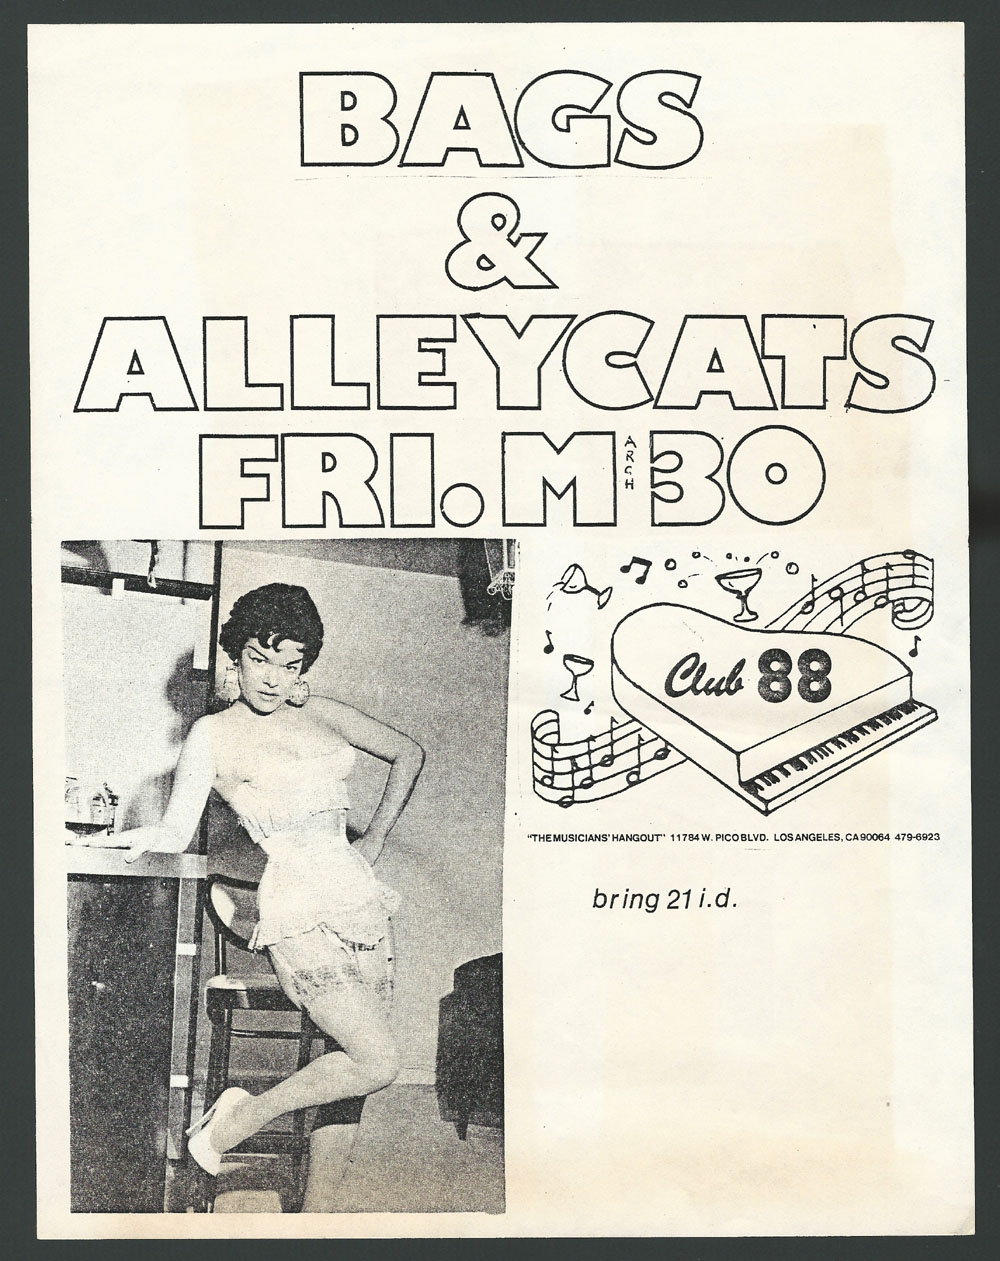 BAGS w/ Alley Cats at Club 88